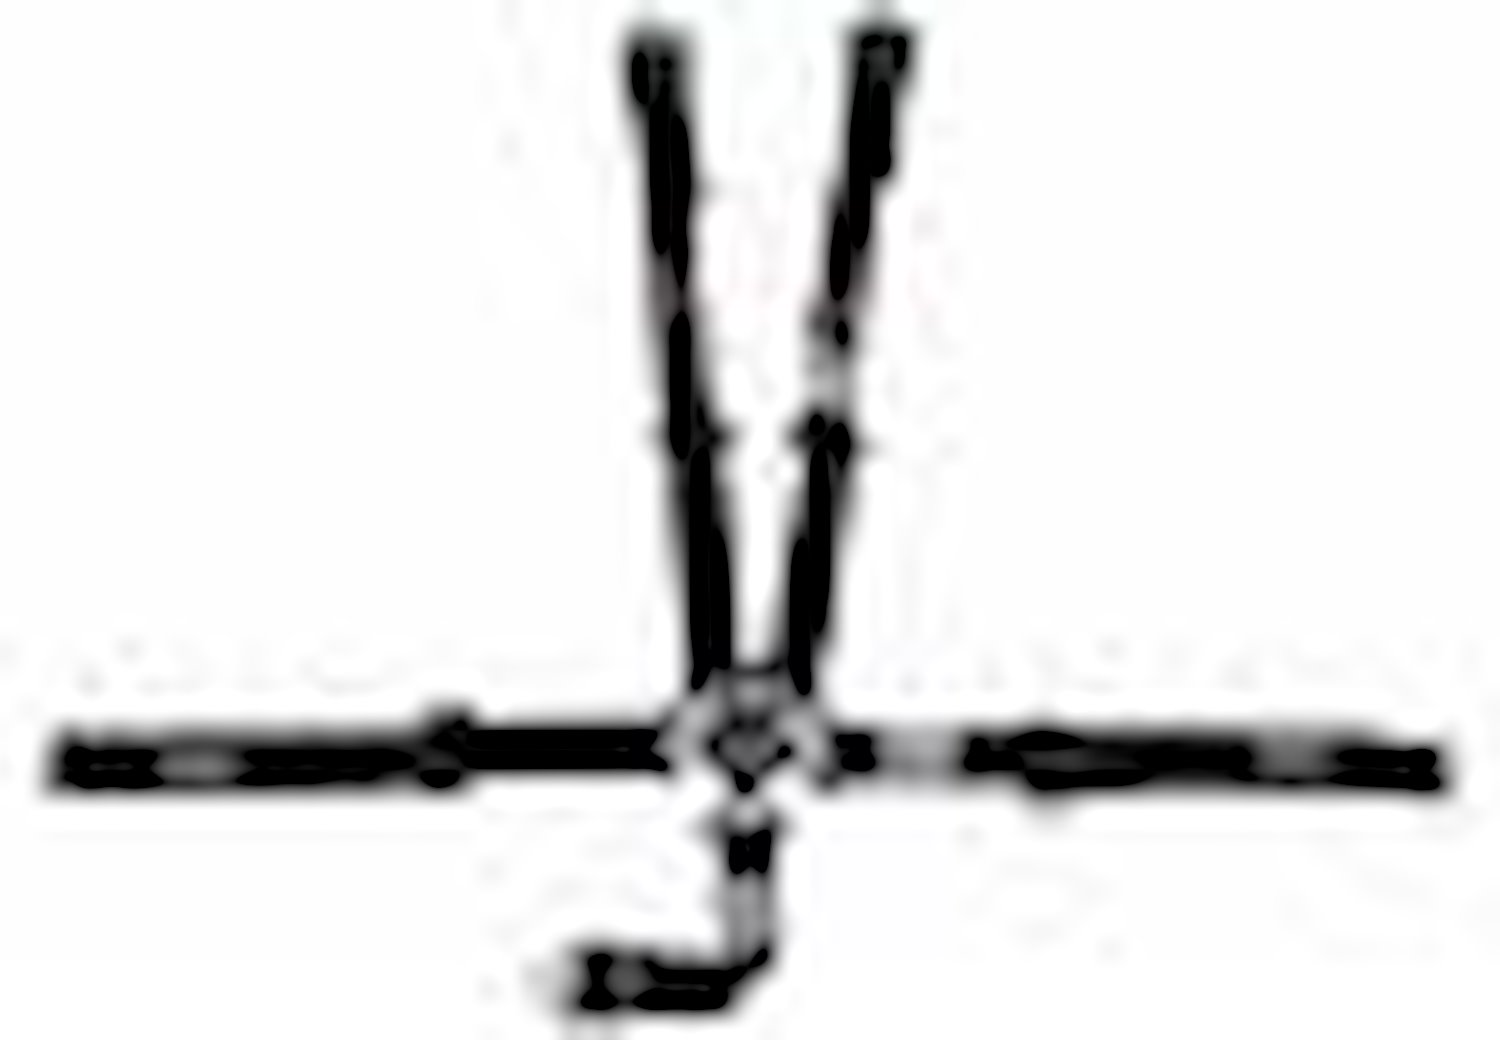 SFI 16.1 CAM-LOCK HARNESS 2 PULL UP Lap Belt 2 Shoulder Harness V ROLL BAR Mount 2 DOUBLE Sub ALL BOLT ENDS w/STERNUM STRAP GRAY